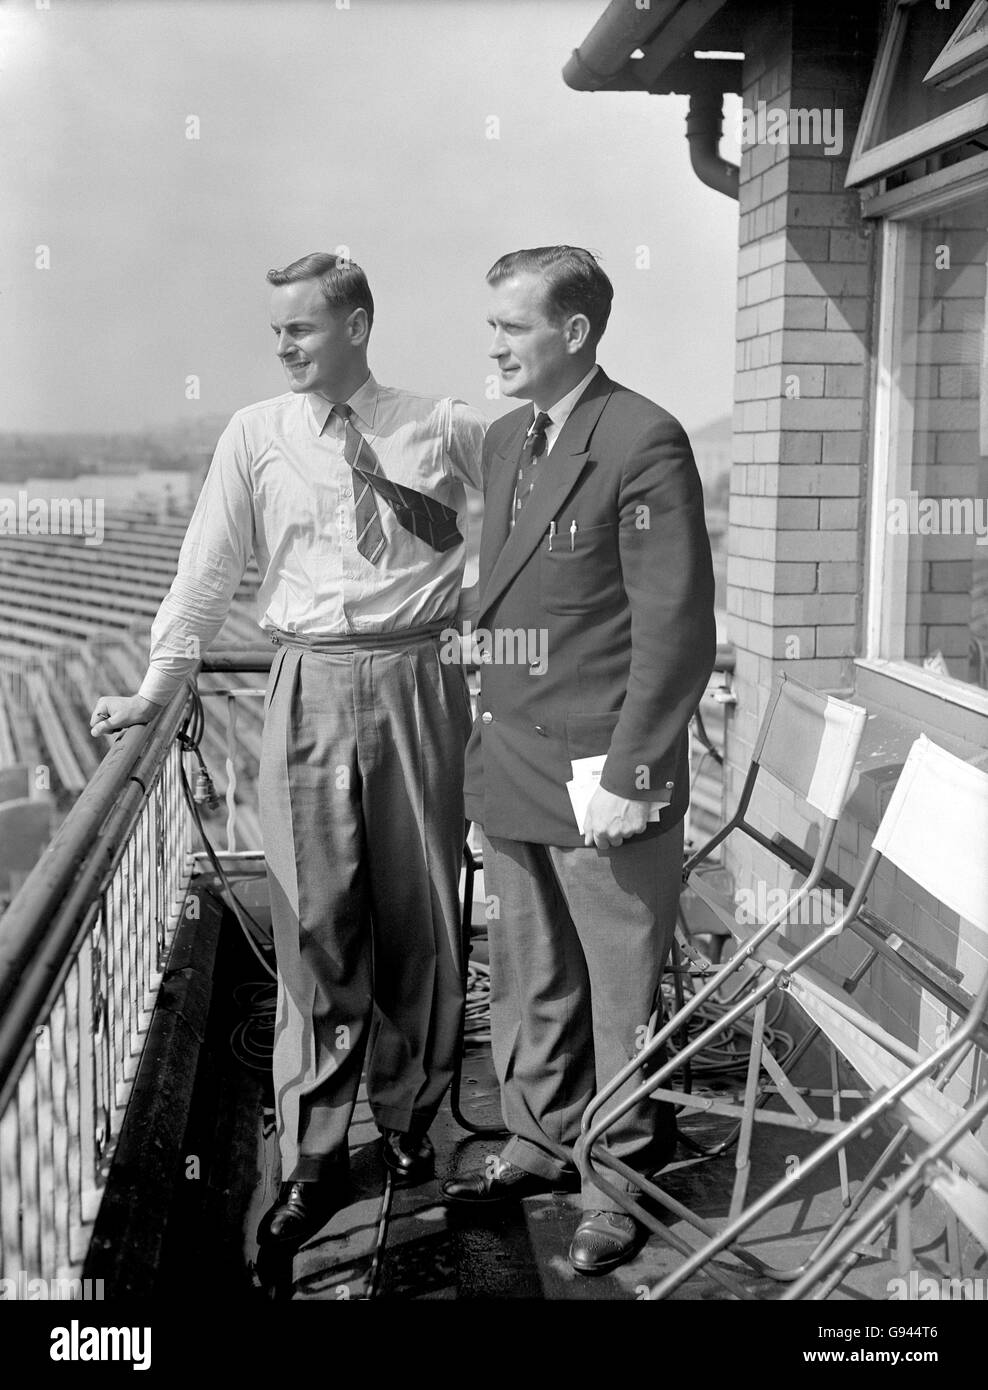 Cricket - The Ashes - Fourth Test - England v Australia - Old Trafford - Third Day. England's Peter May (l) and Jim Laker (r) look forward to the third day's play from the dressing room balcony Stock Photo